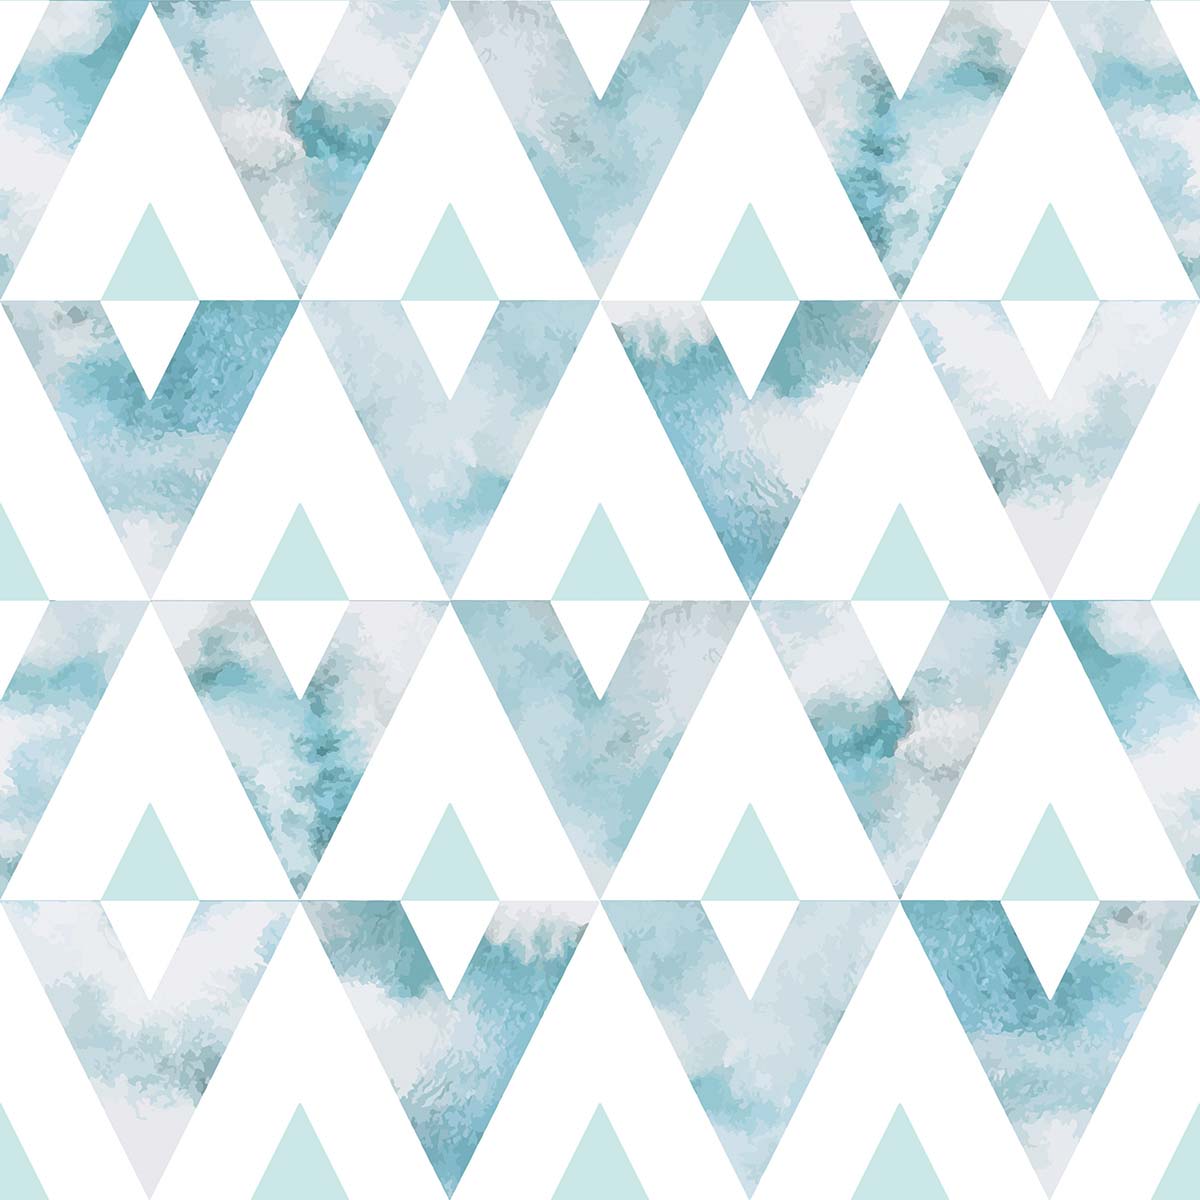 A pattern of triangles and watercolors